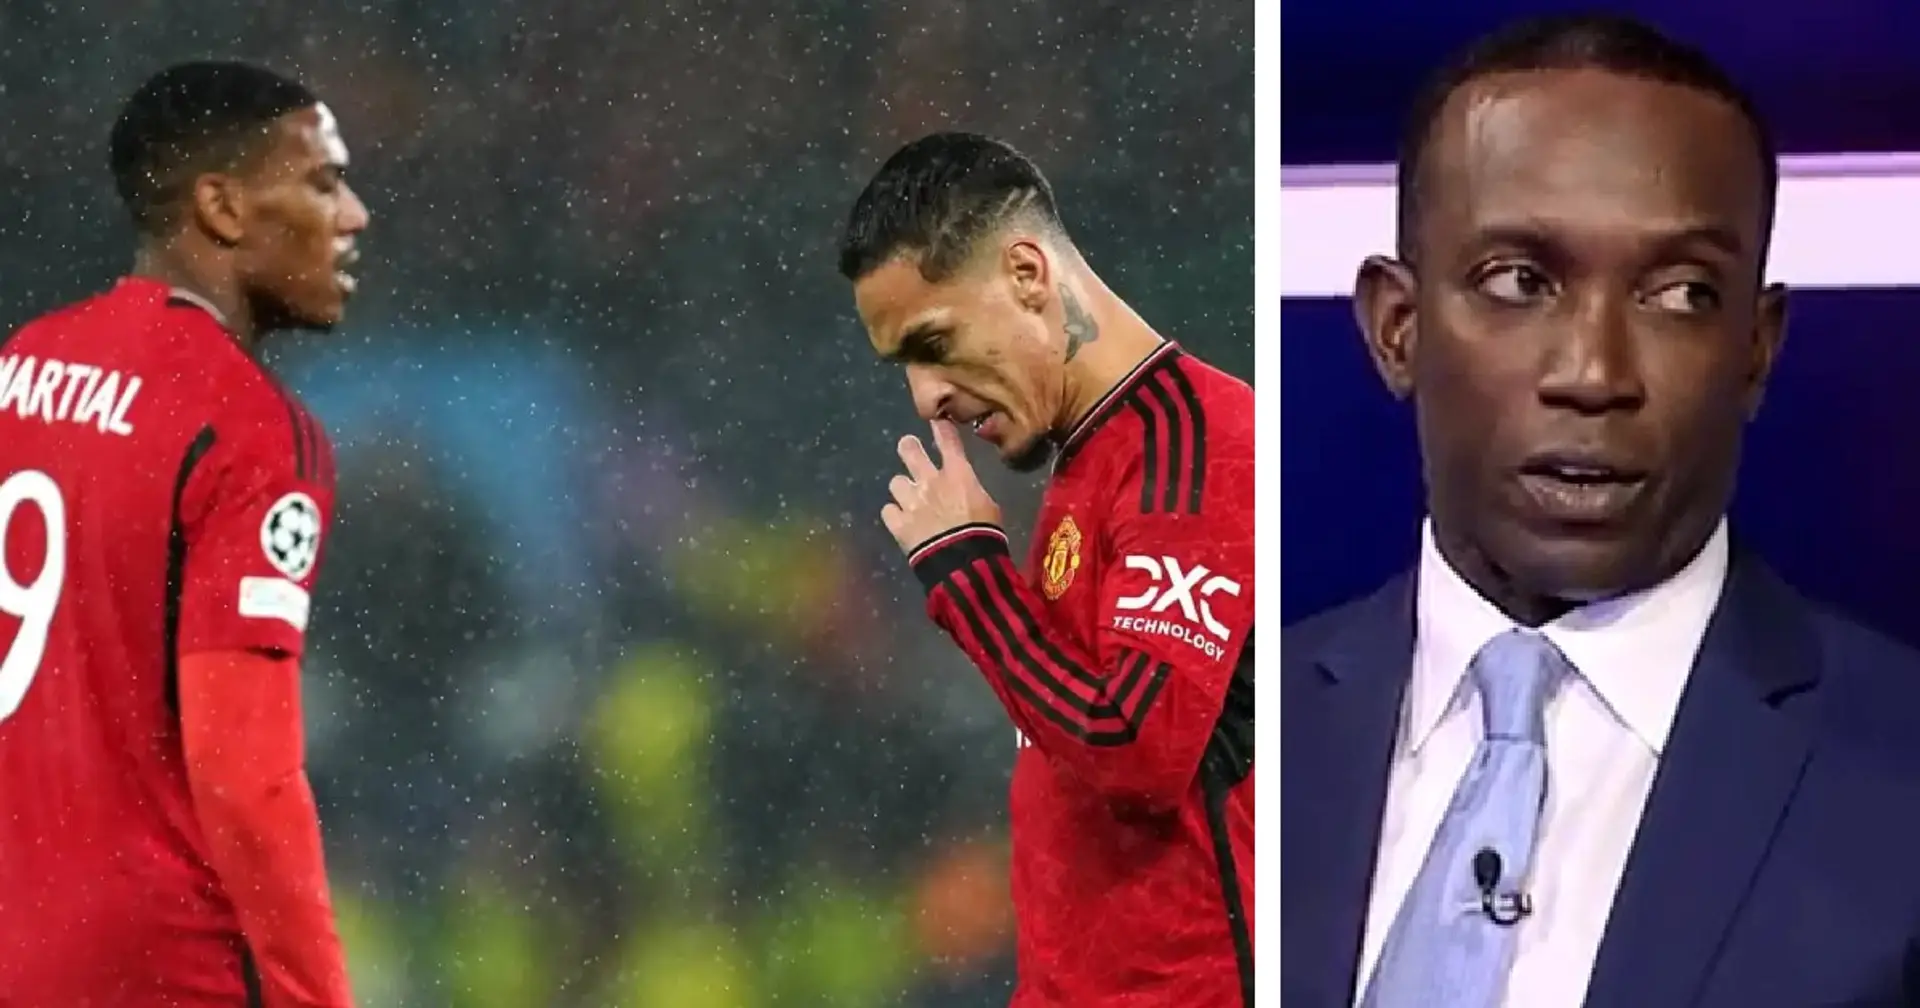 'I feel for him': Yorke wants Man United to sell underperforming player as 'quickly as possible'